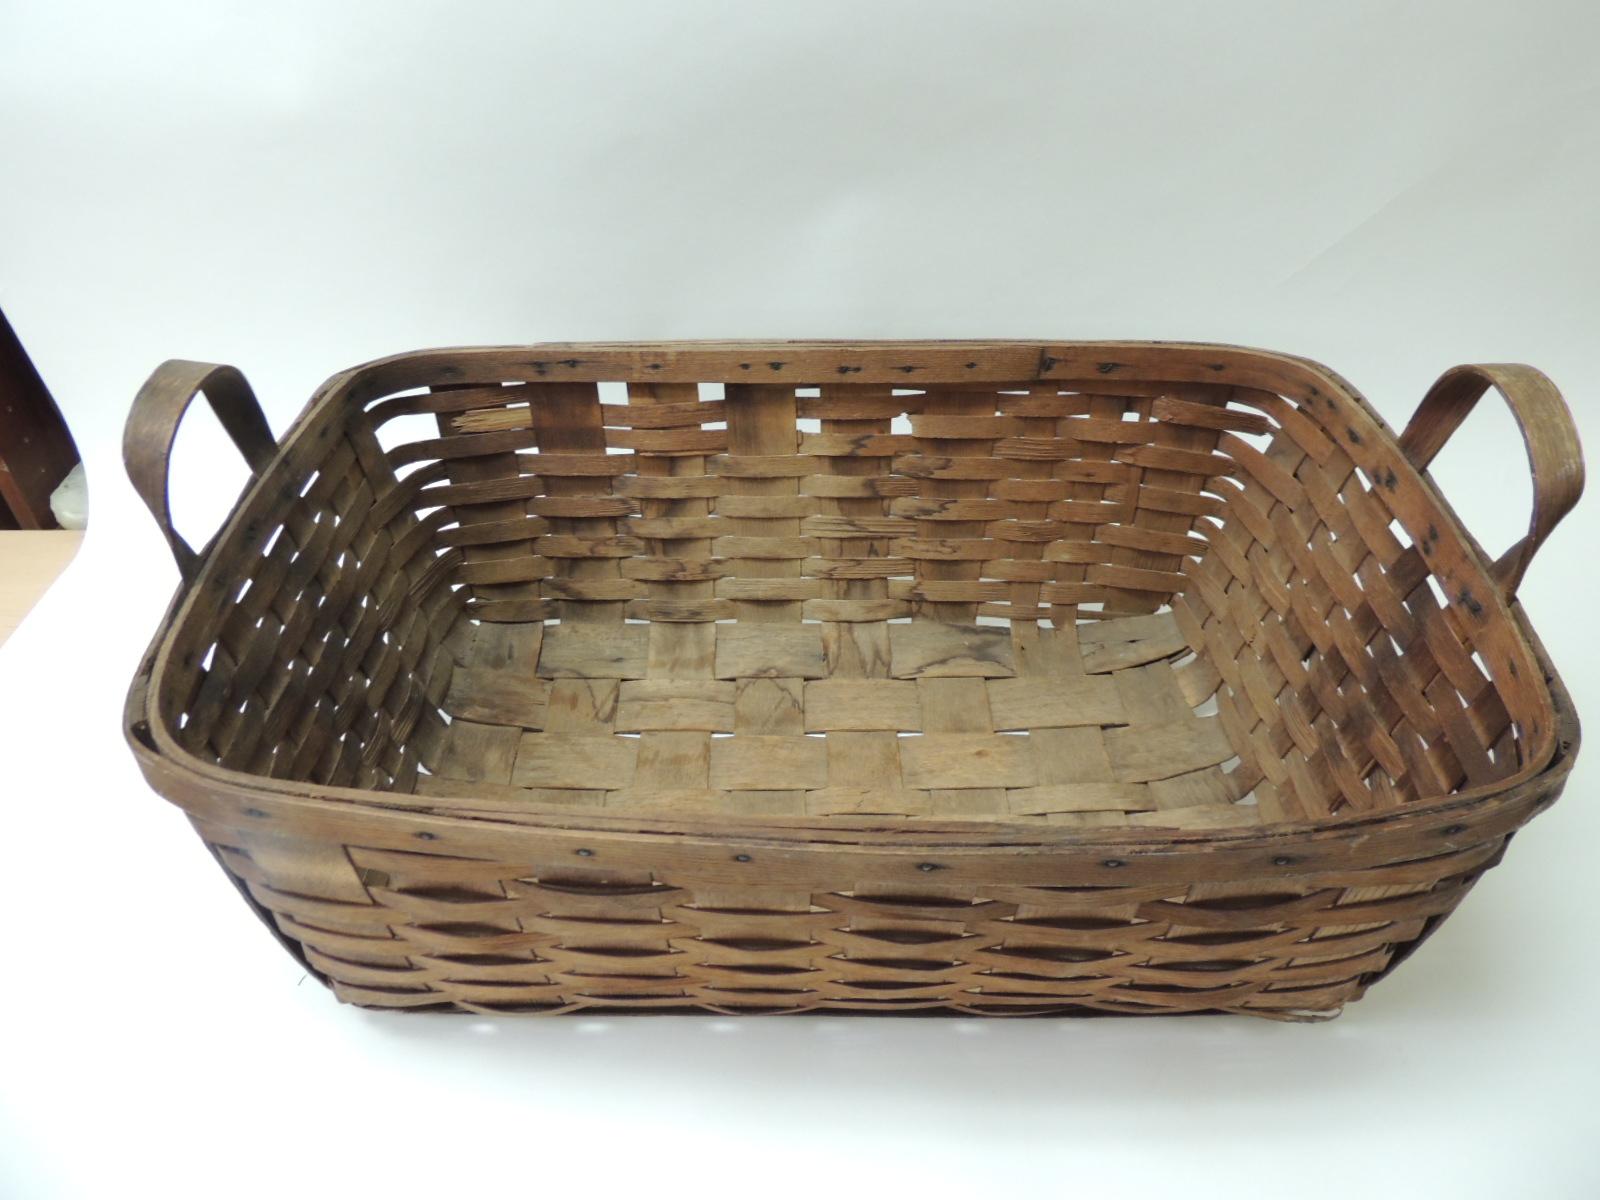 Antique large over-size wooden flat-woven harvest basket with same wood handles
a beautiful patina on the wooden flat woven due to the natural aging process.
USA, 1920s.
Size: 16 x 26 x 9 H.